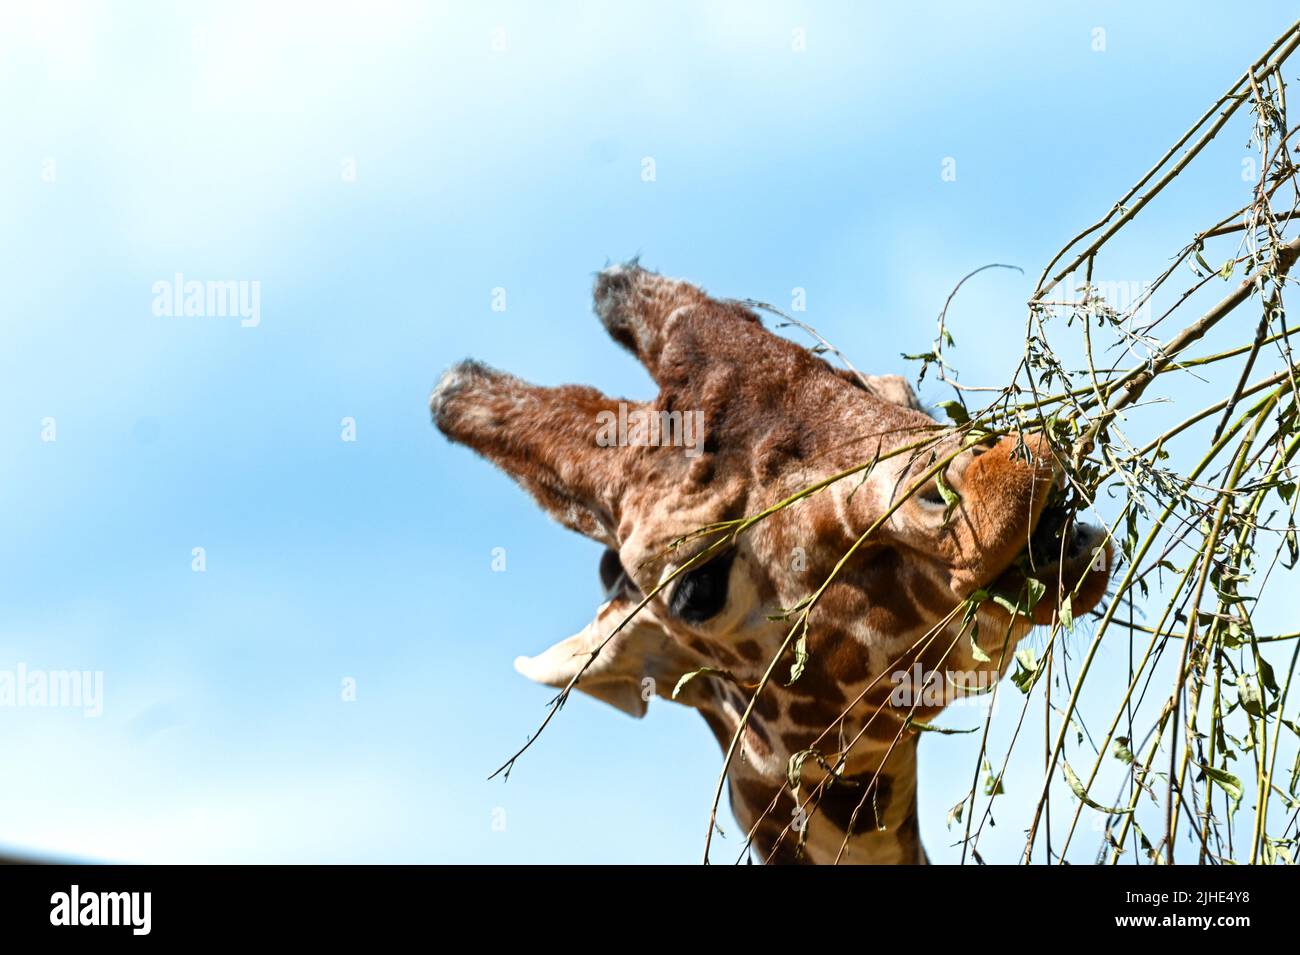 A Rothschild, Reticulated Giraffe head with their ears pinned back munching on a branch Stock Photo